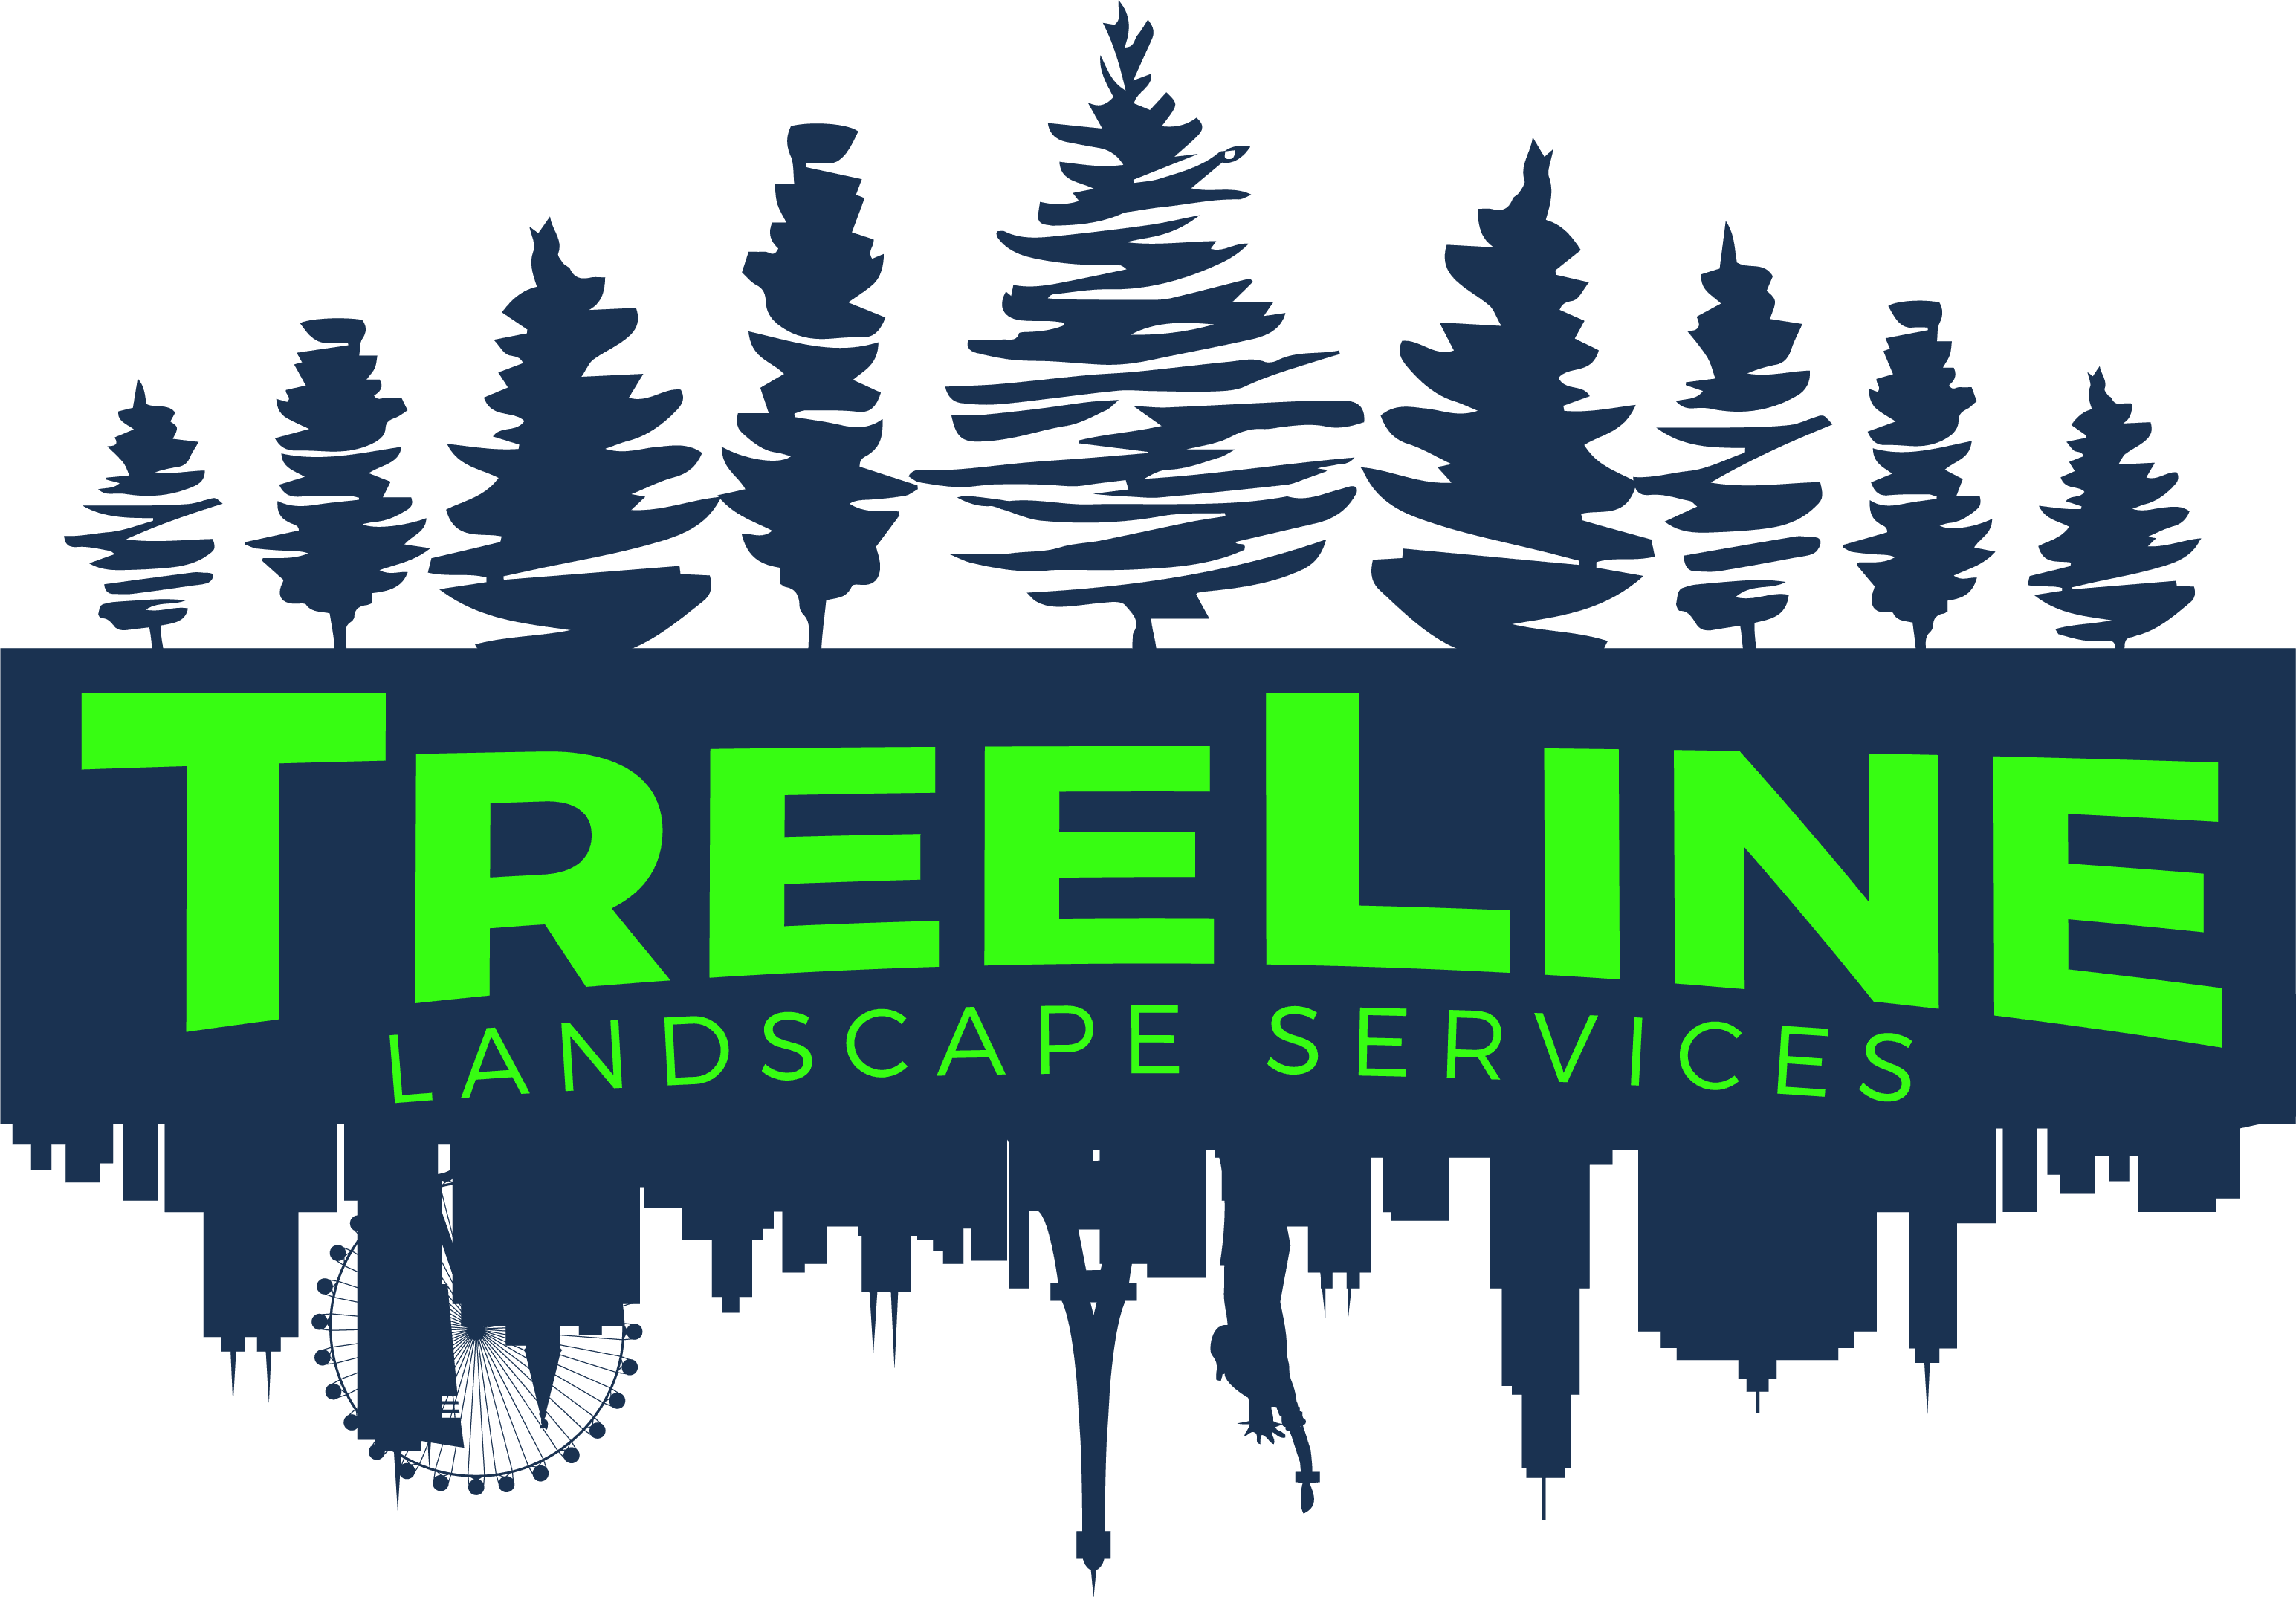 A green and blue logo for treeling landscape services.